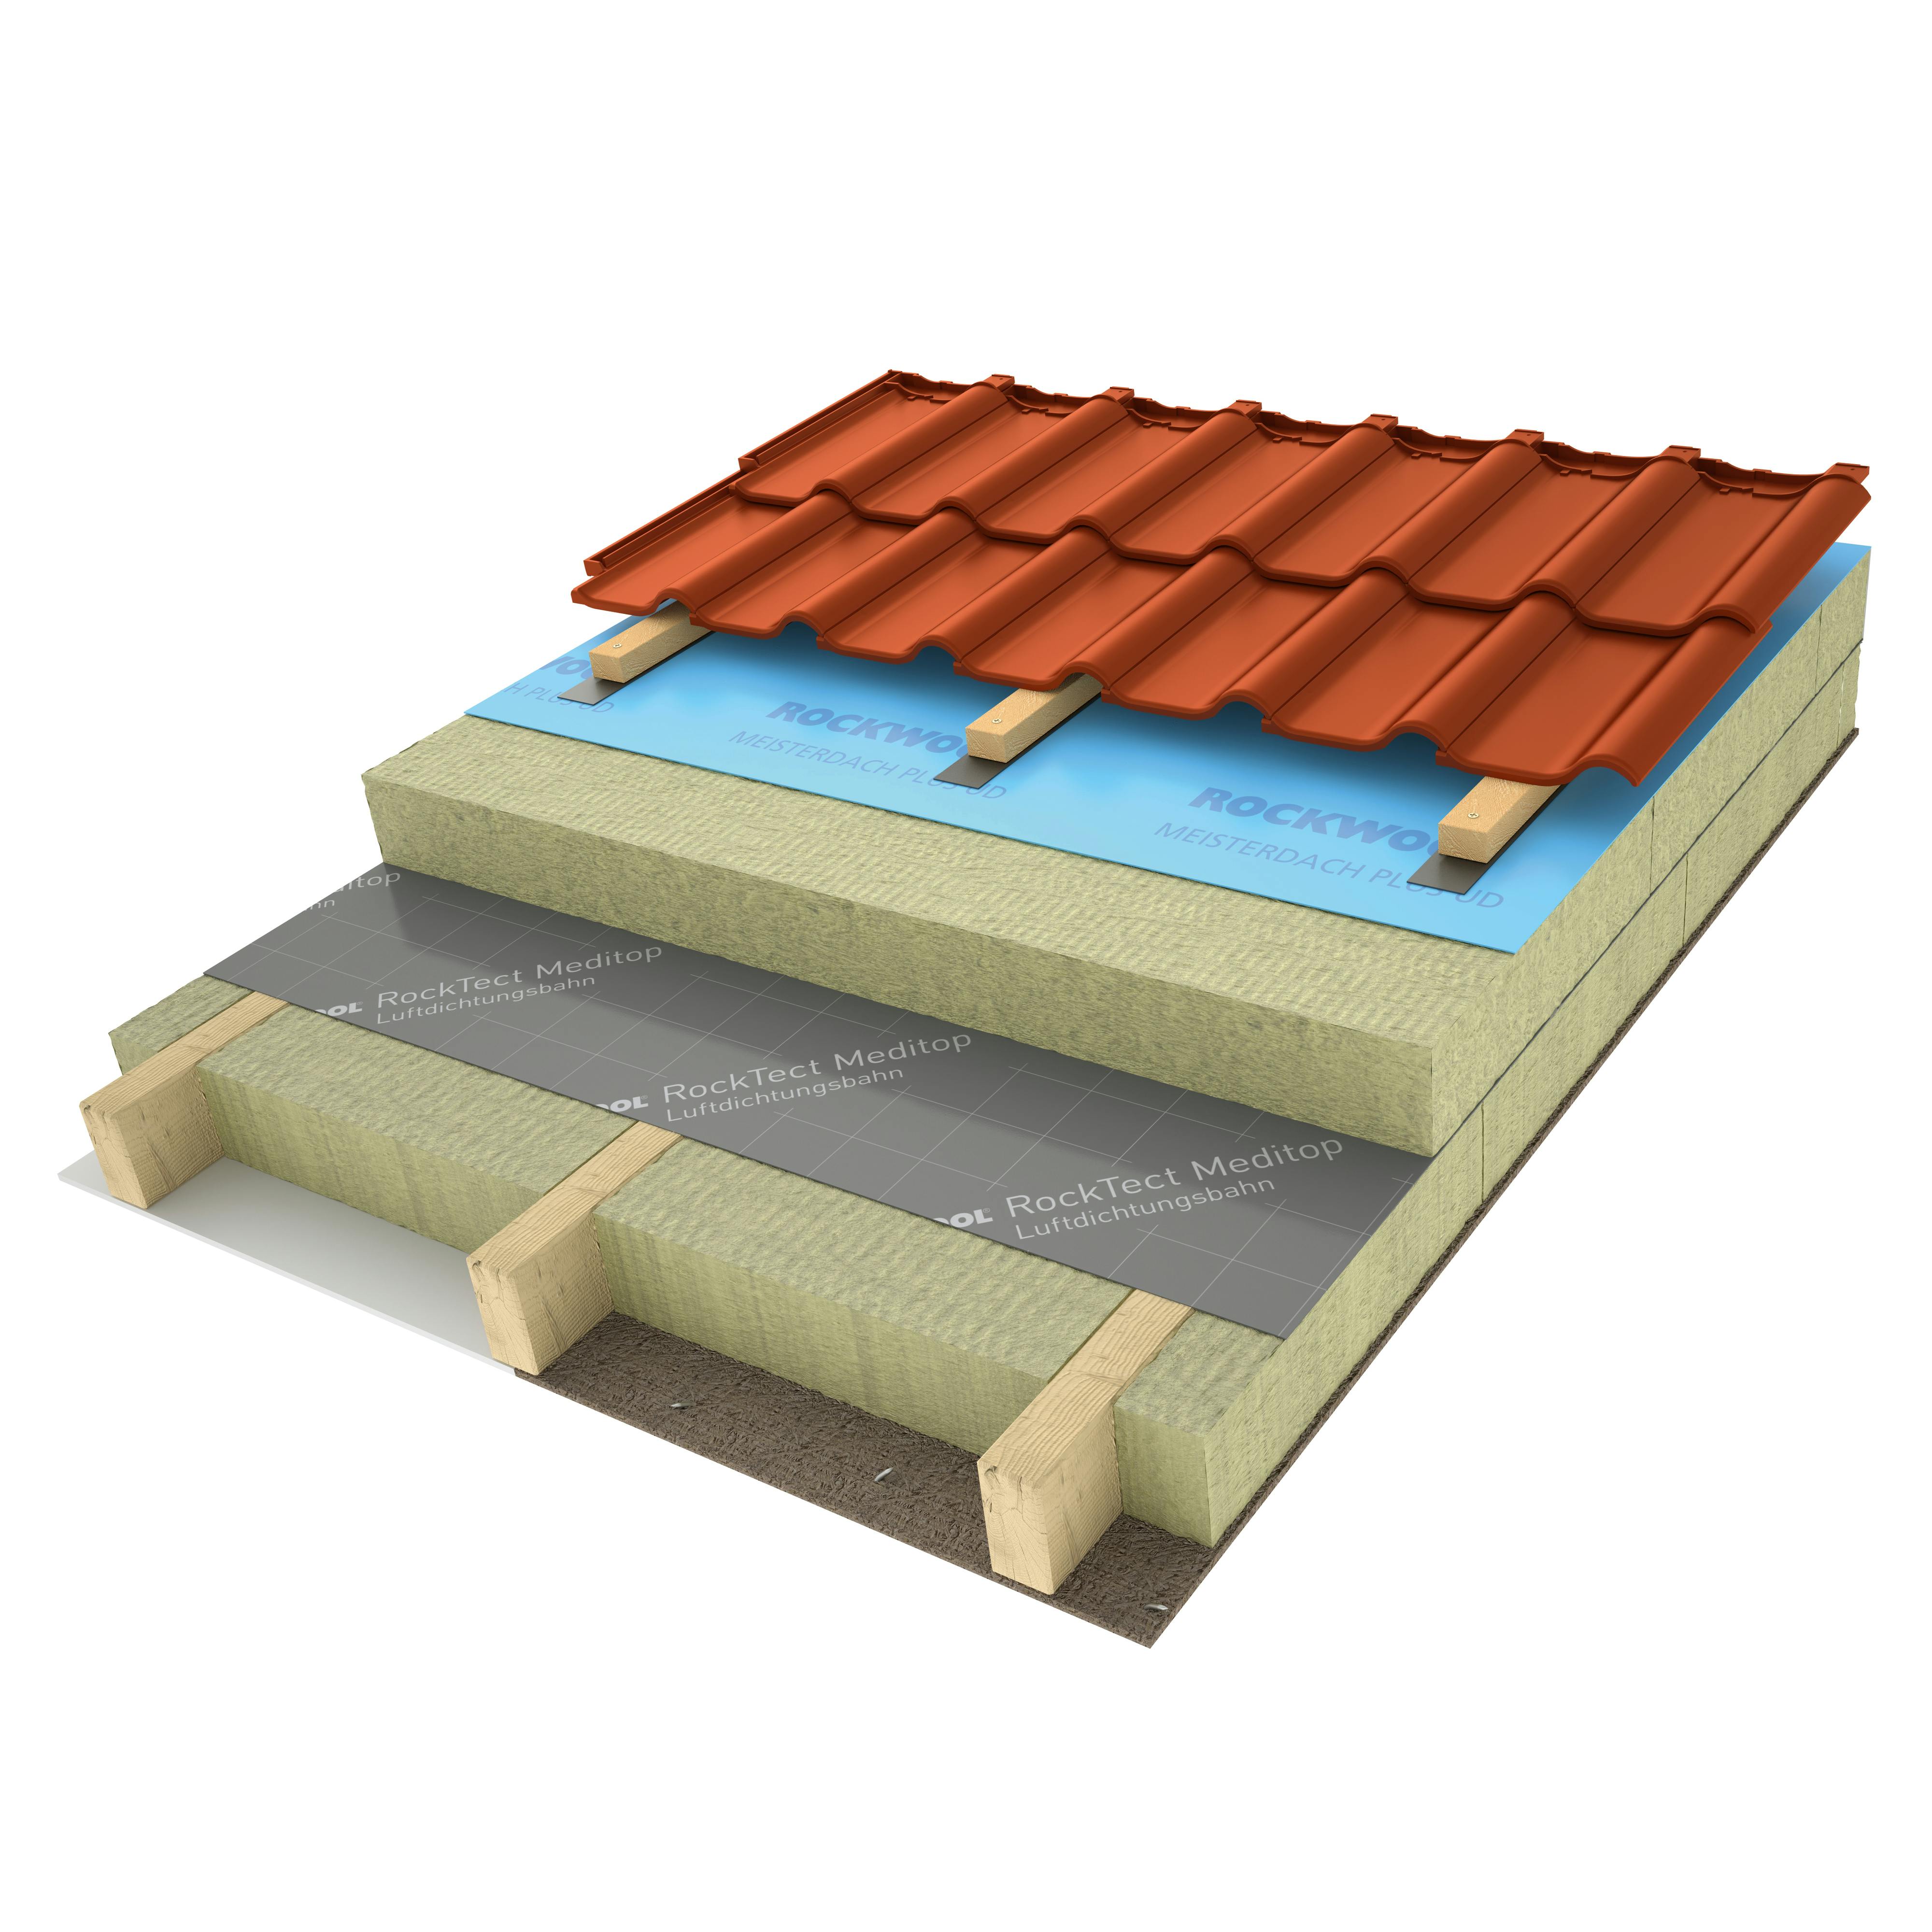 products, pitched roof, insulation above the rafters, insulation on the rafters, meisterdach, masterrock, rocktect, meditop, rocktect meditop, illustration, graphic, schraegdachbroschuere, germany